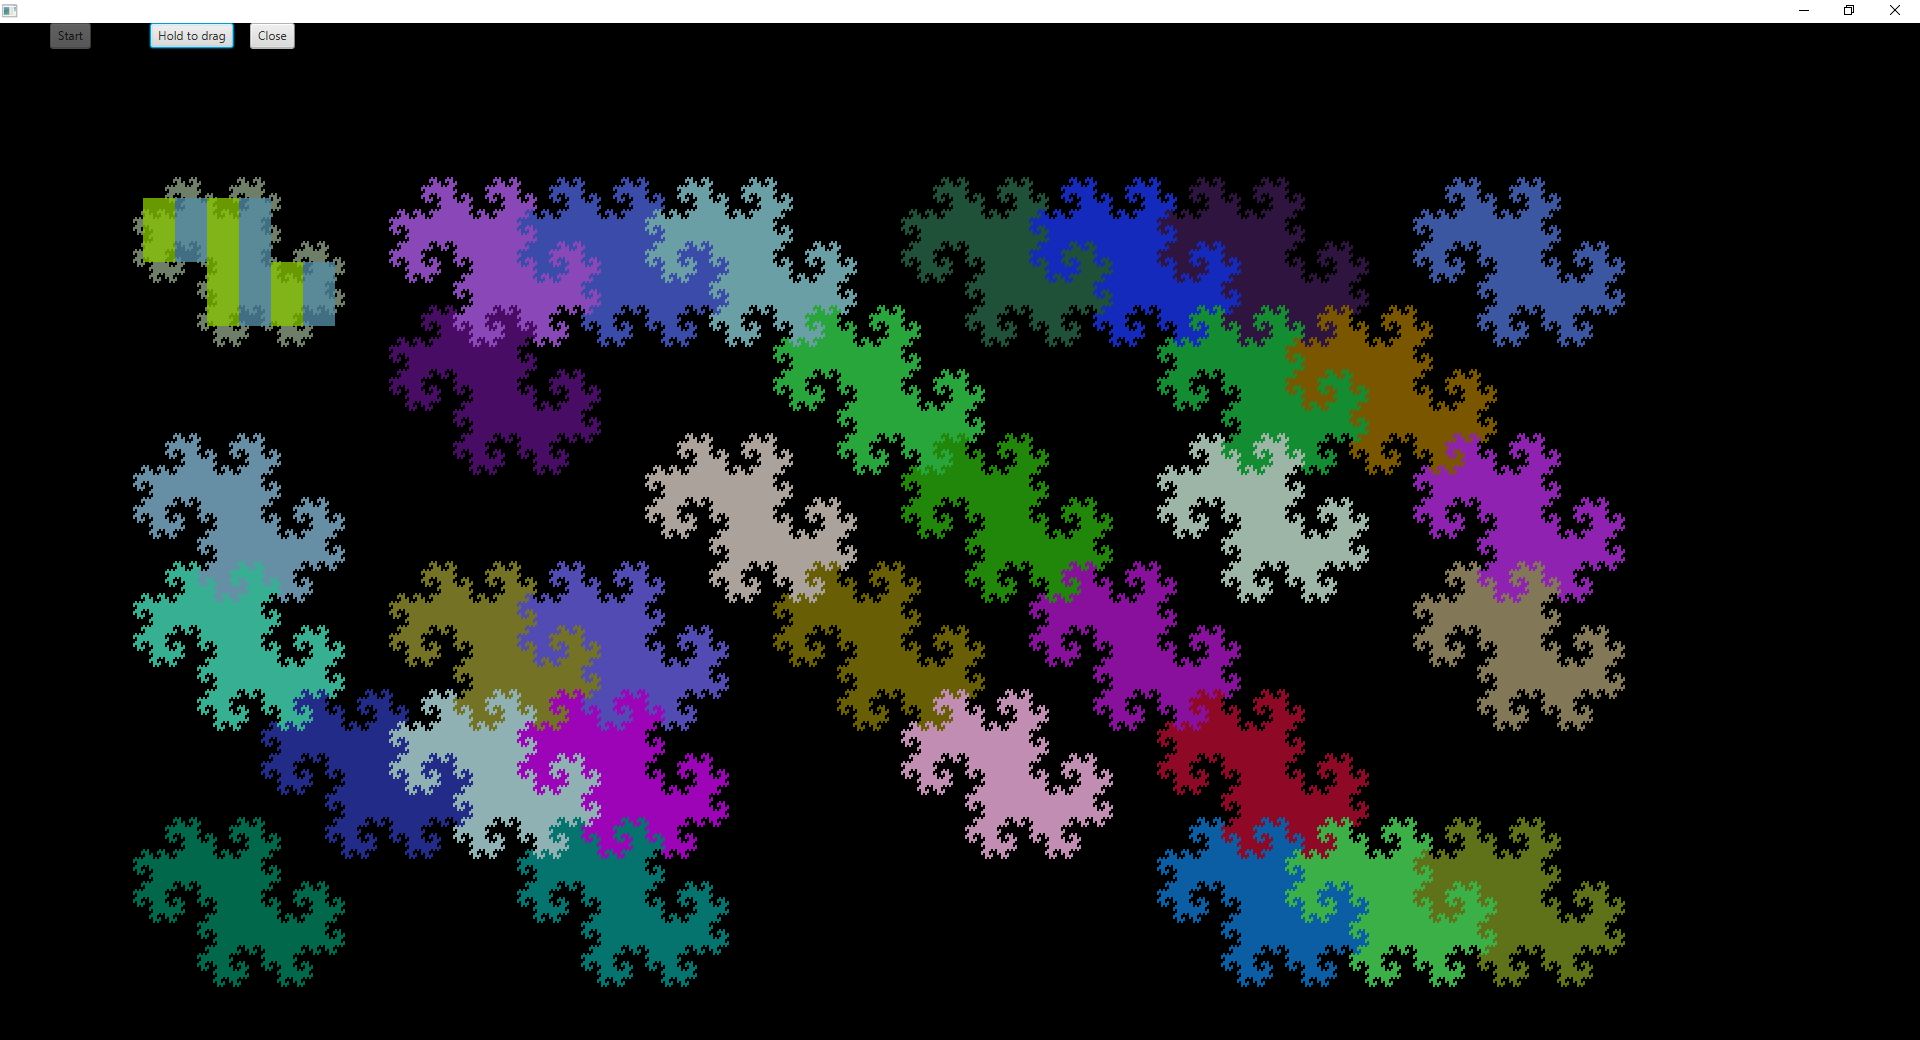 Fractal example